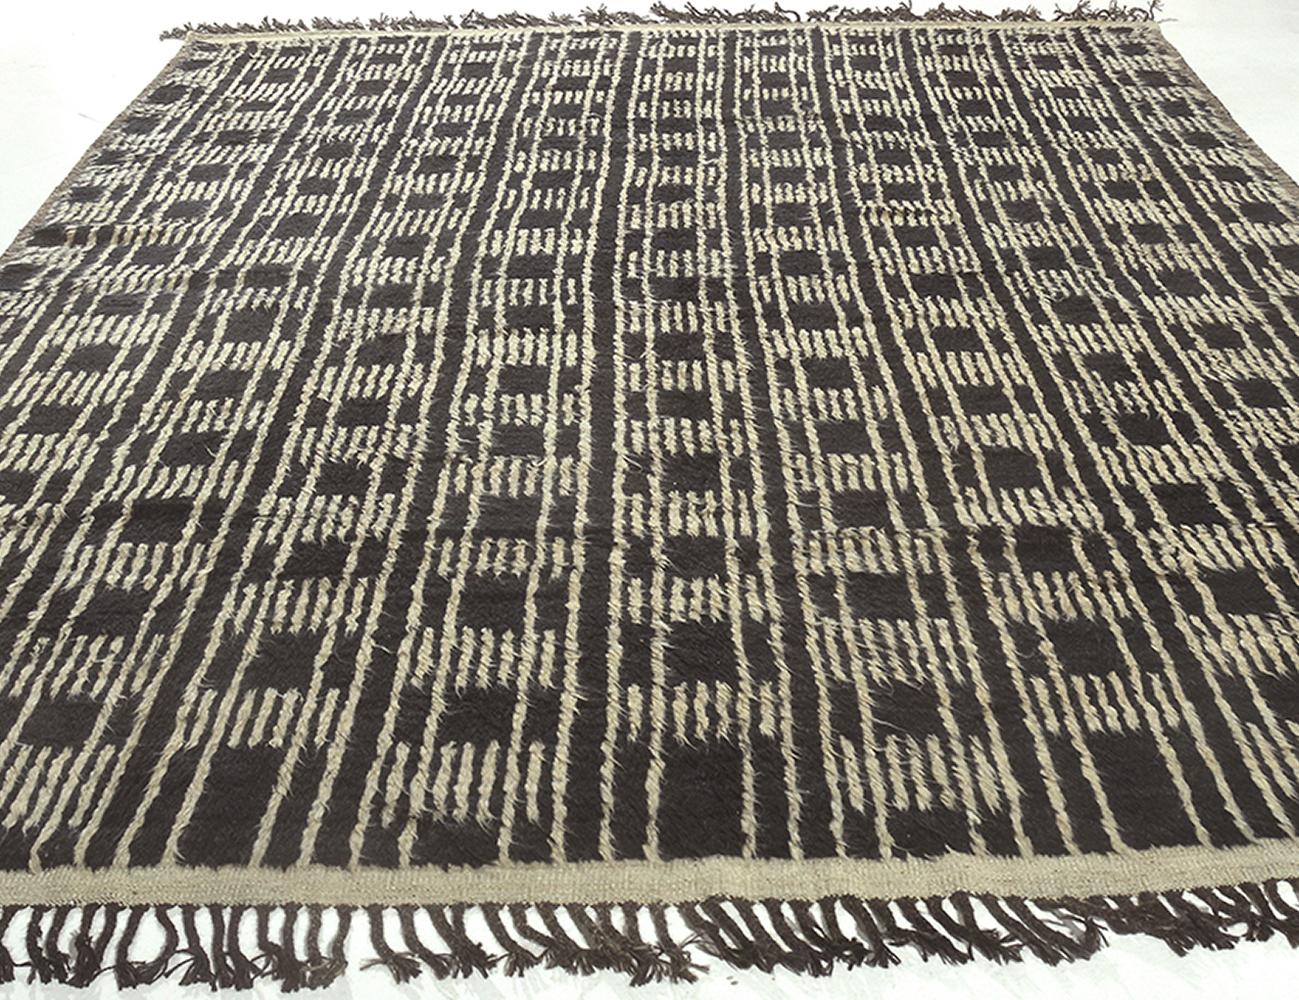 Contemporary Nazmiyal Collection Modern Boho Chic Rug from Central Asia. 9 ft 5 in x 13 ft